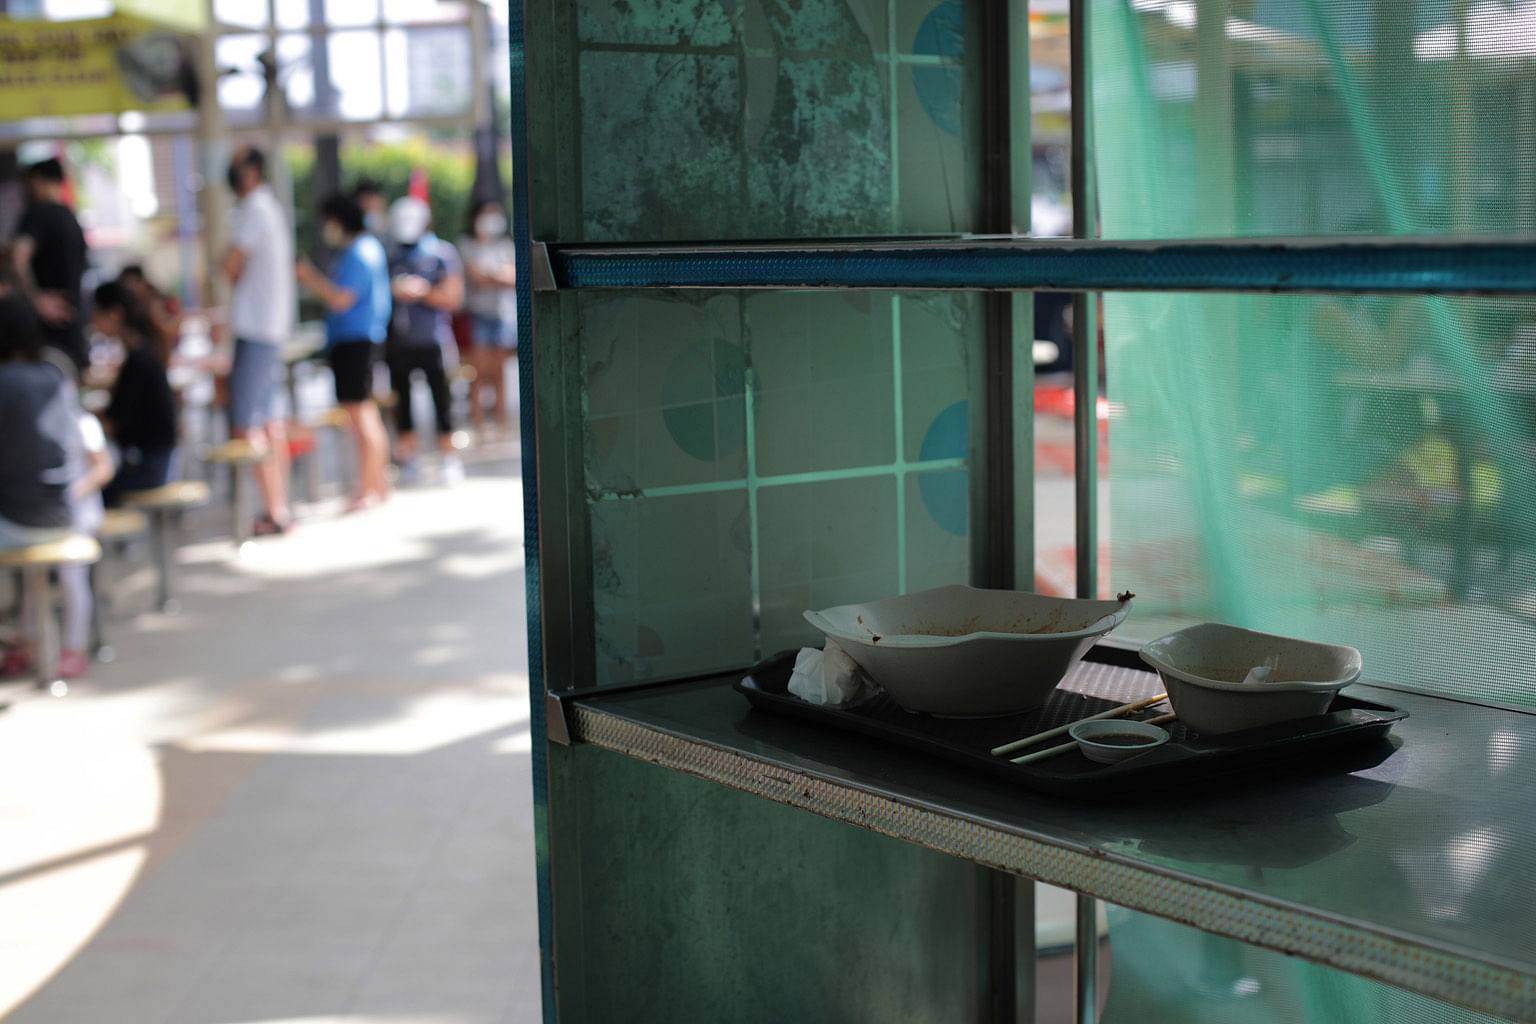 Used crockery and a tray left on a table at Teck Ghee market yesterday, when a Straits Times check found that on average, eight out of 10 diners did not follow the SG Clean task force's recommendations.